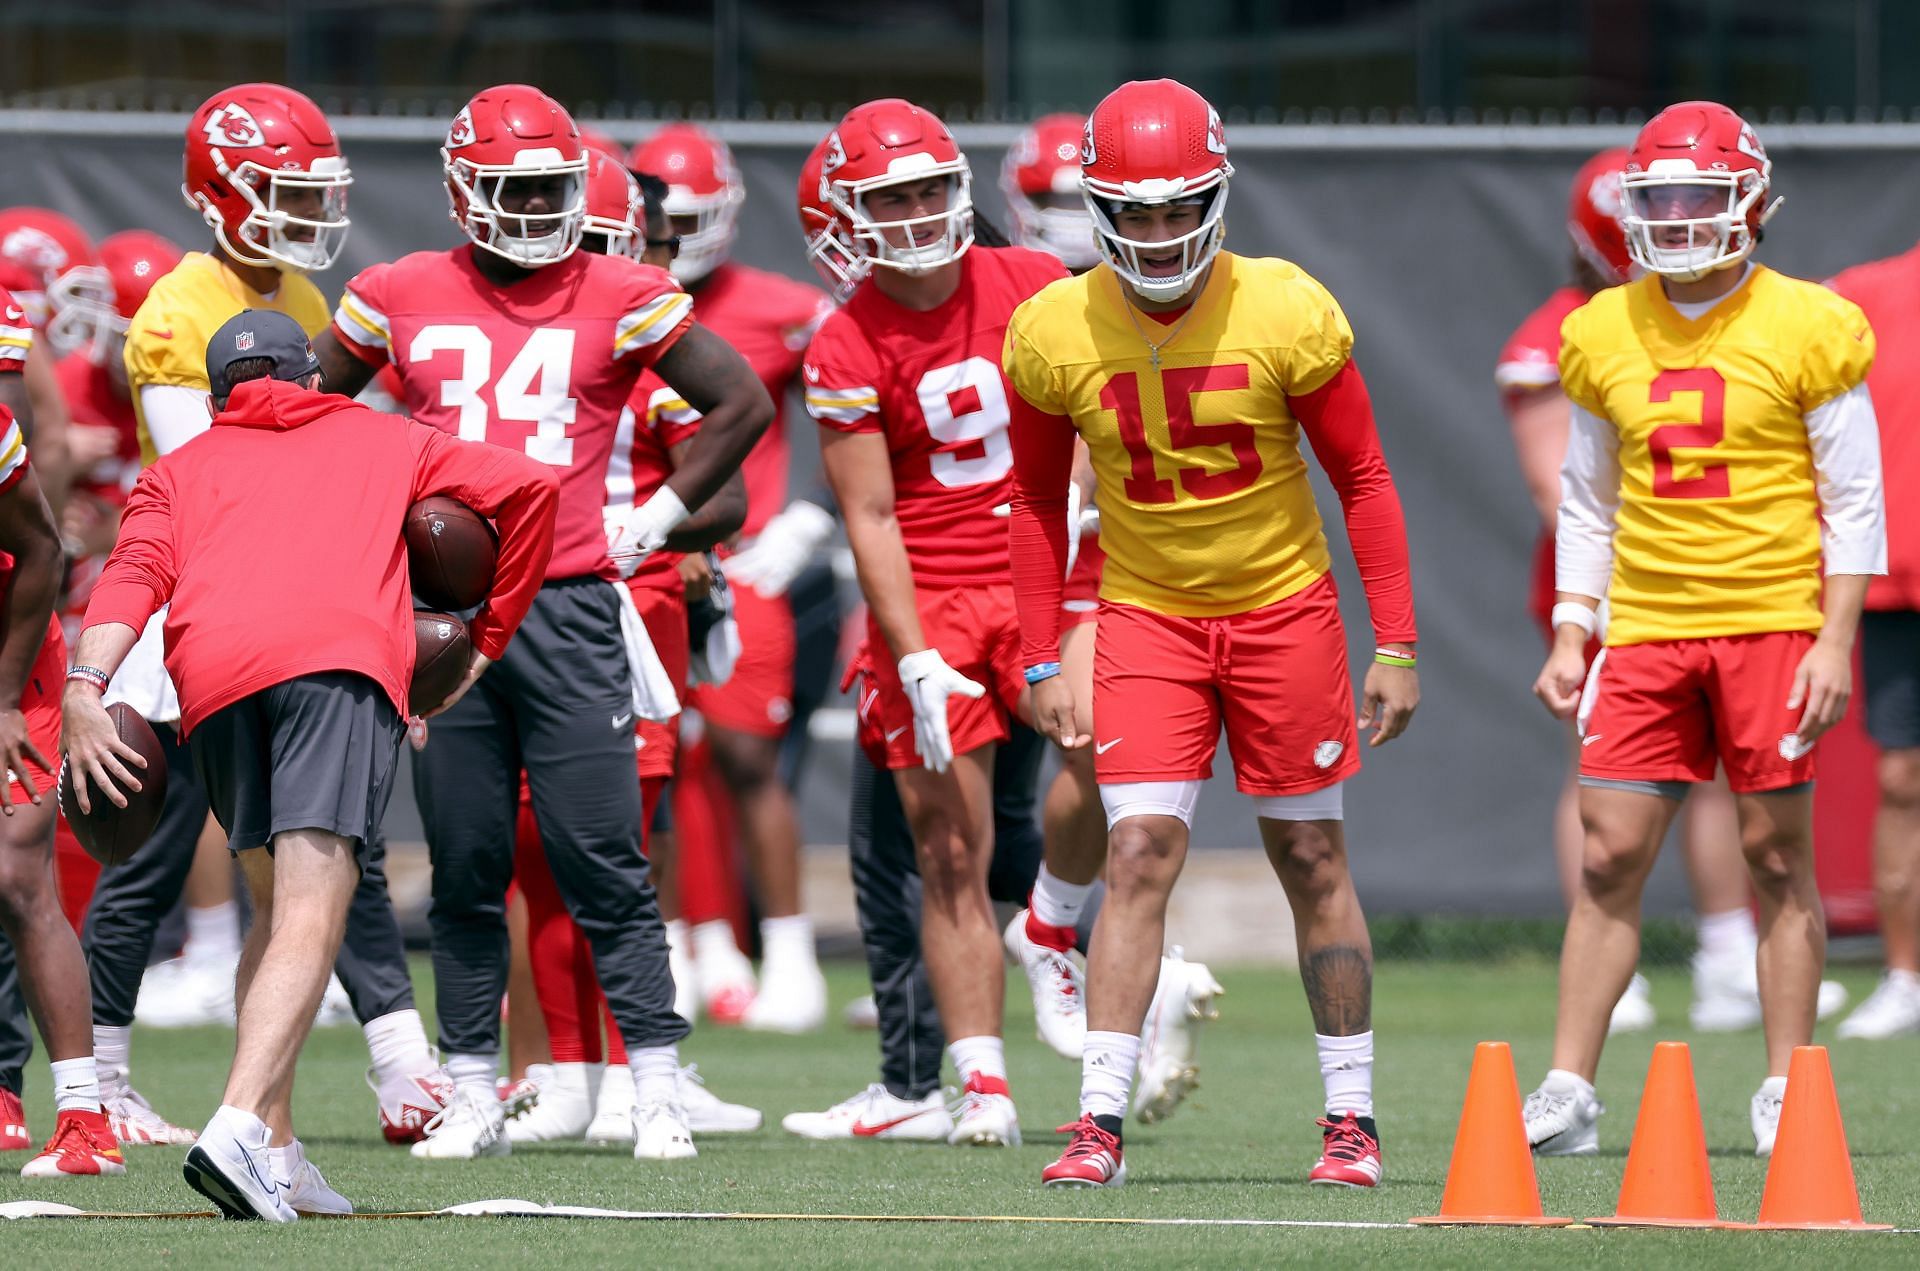 Can Patrick Mahomes and the Chiefs win again?